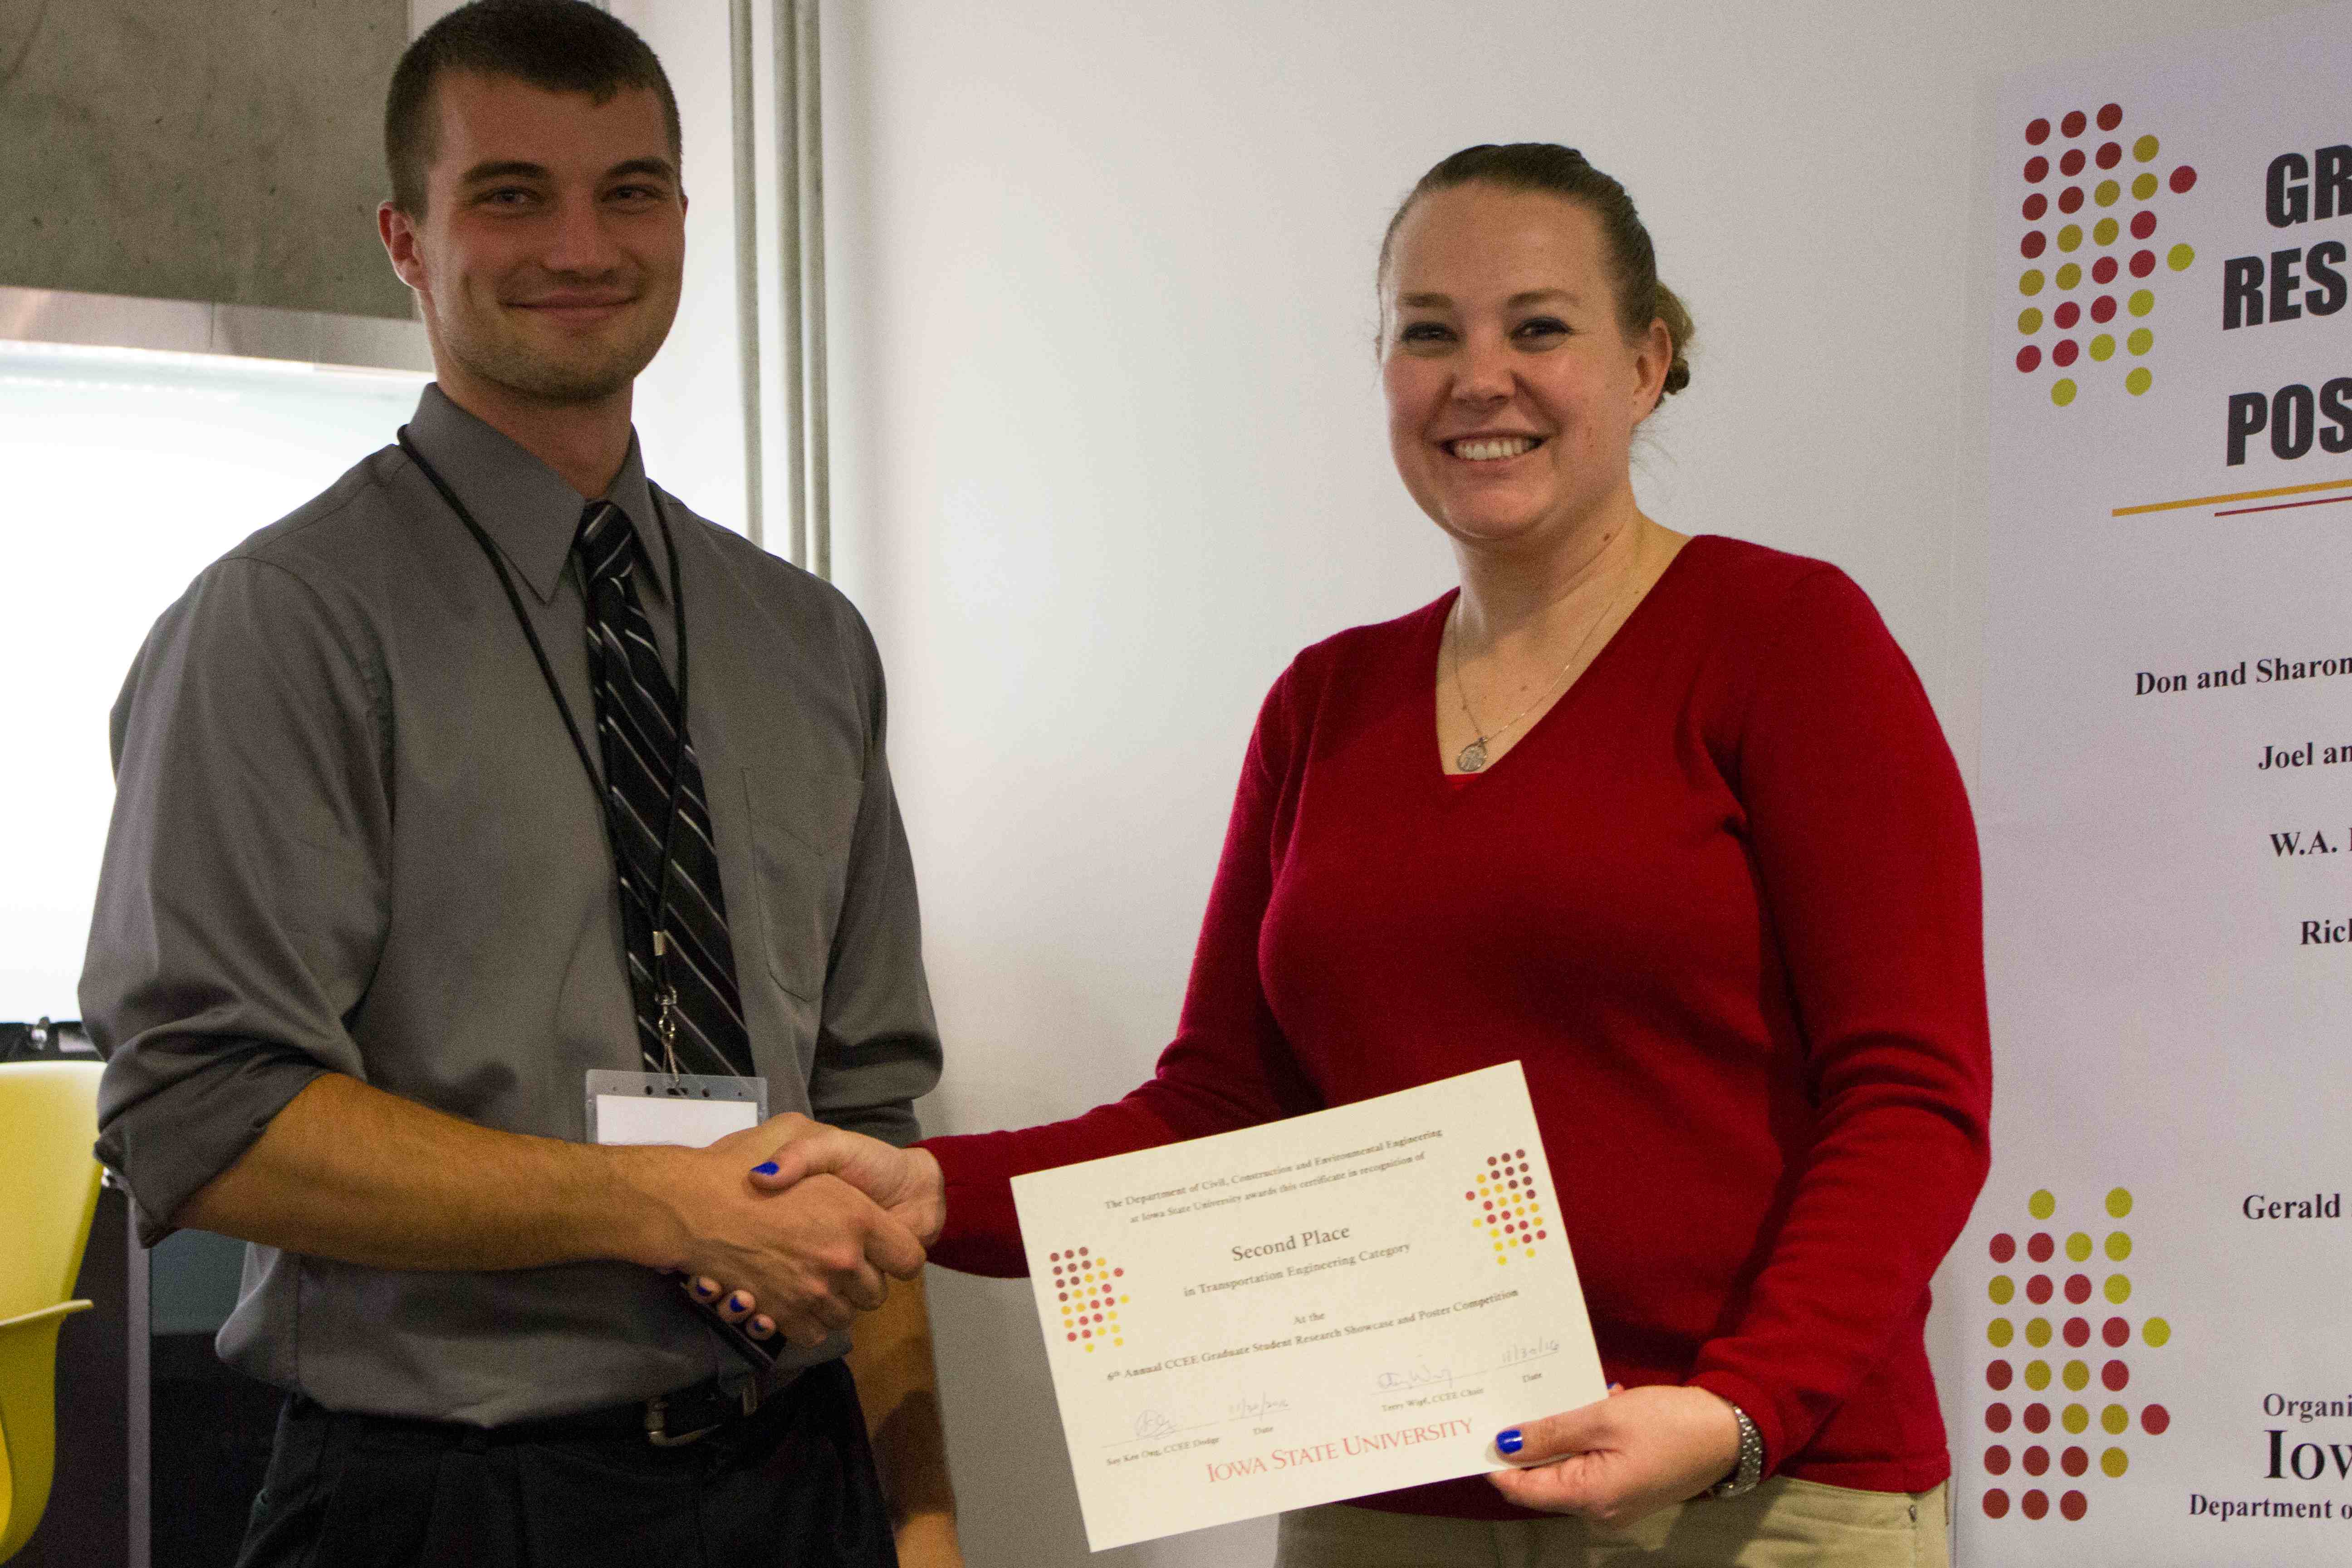 Ophoff (left) earns first place in the Exhibition Showcase category at the Sixth Annual CCEE Graduate Student Research Showcase and Poster Competition. Dr. Jennifer Shane (right) giving award. (Photo by Kate Tindall)